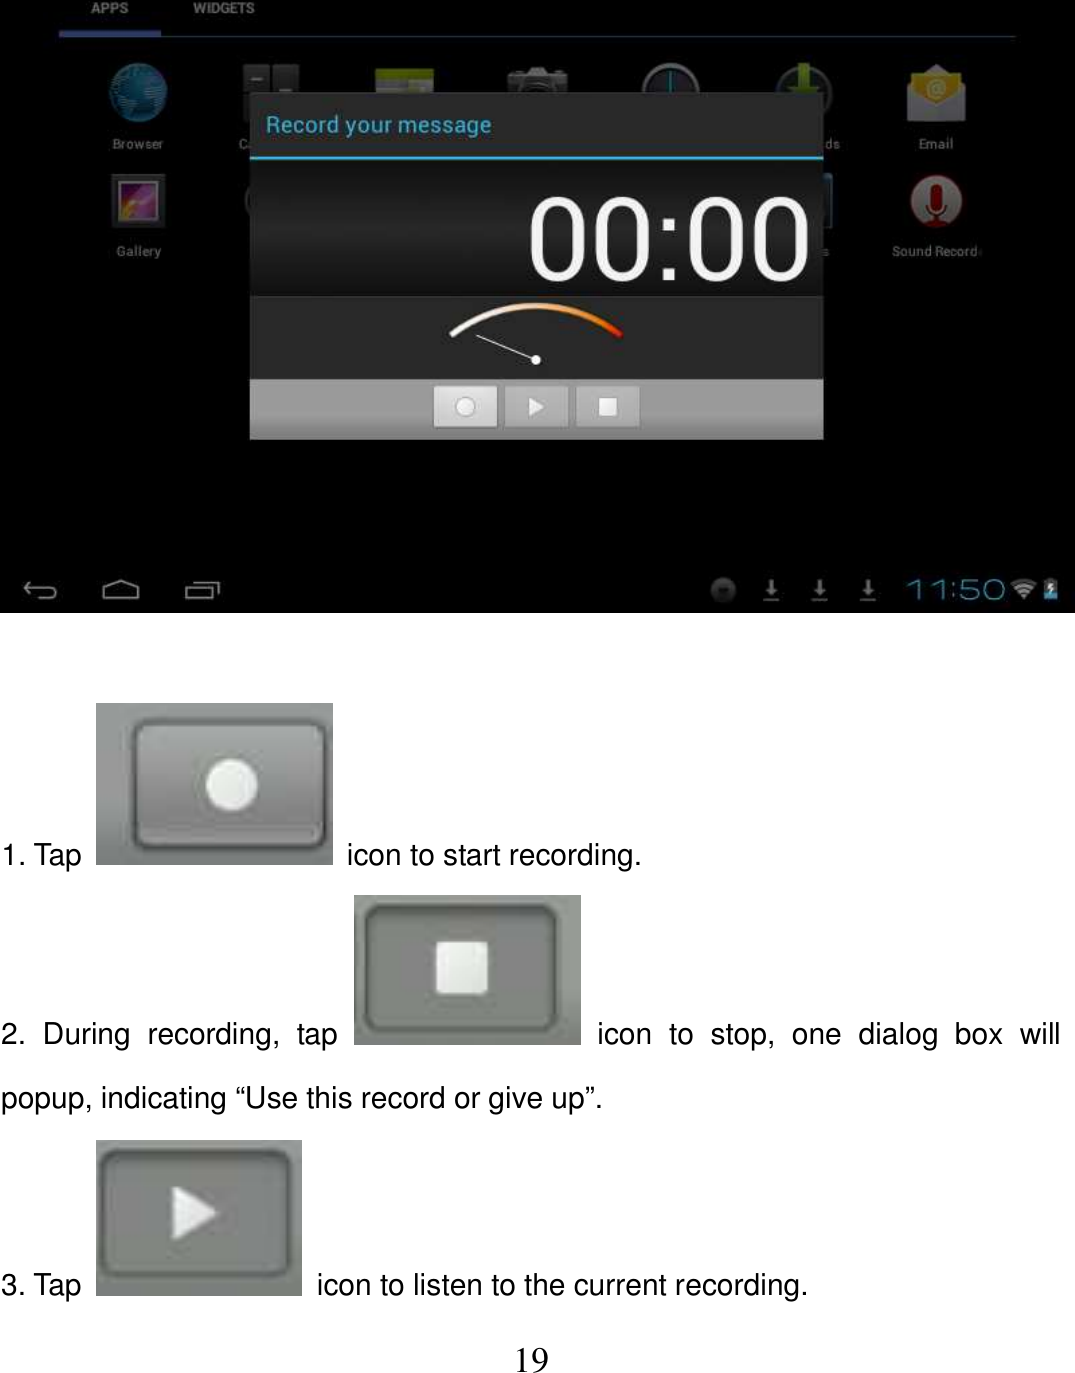   19   1. Tap    icon to start recording. 2.  During  recording,  tap    icon  to  stop,  one  dialog  box  will popup, indicating “Use this record or give up”. 3. Tap    icon to listen to the current recording. 